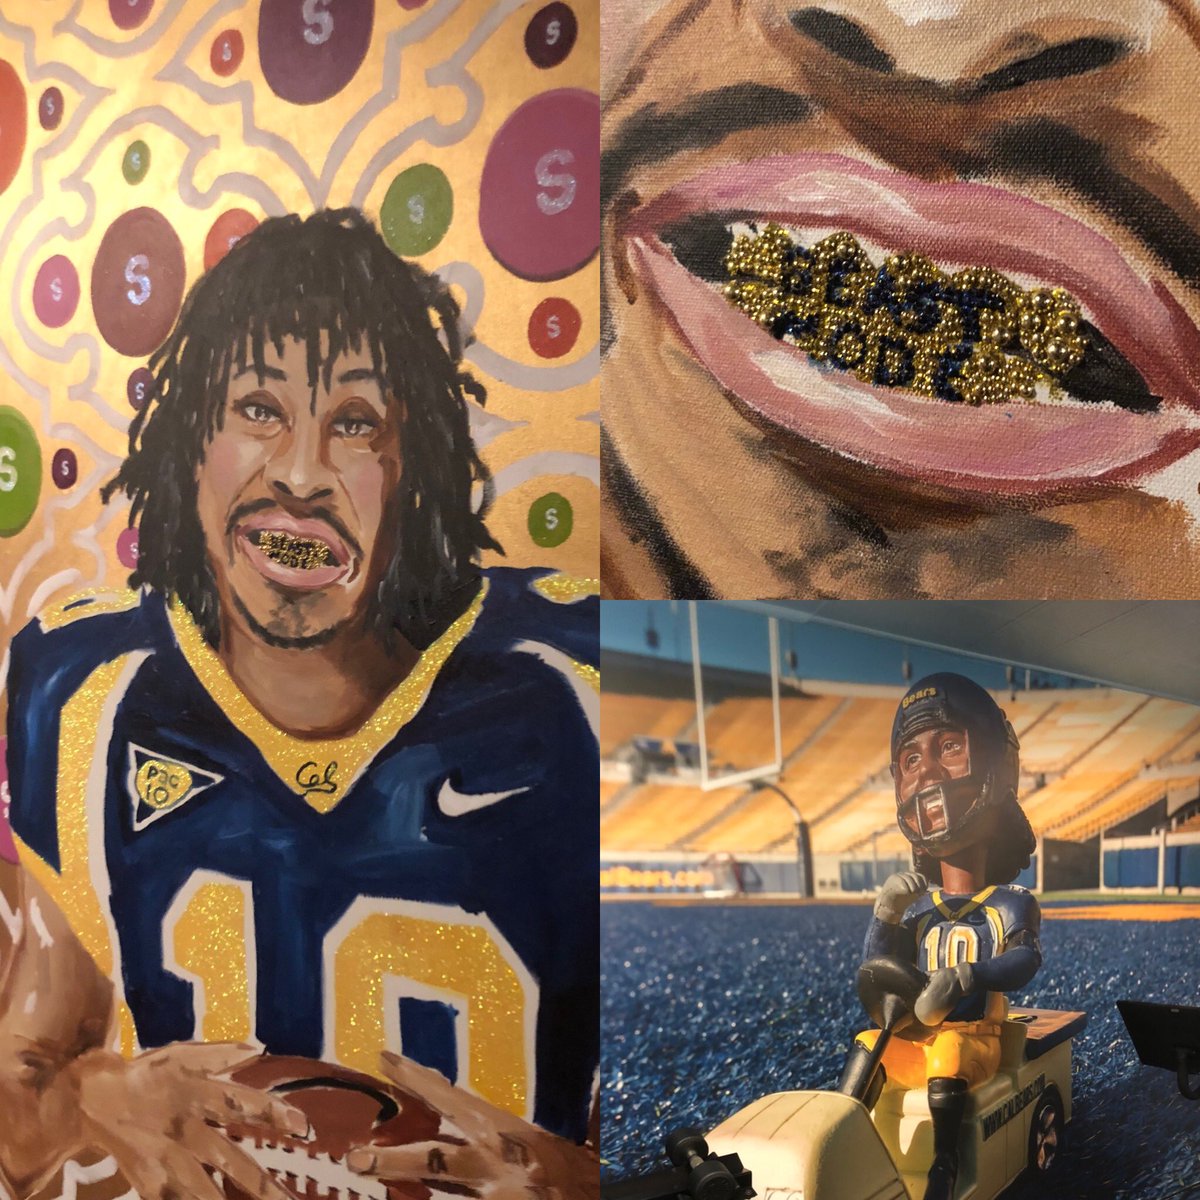 Cal’s greatest athlete on full display @graduateberkeley... Come to think of it, passing #optometry boards requires a little bit of #beastmode 🤔 

#kmkcampusconnectlive boards review - @kmkoptometry